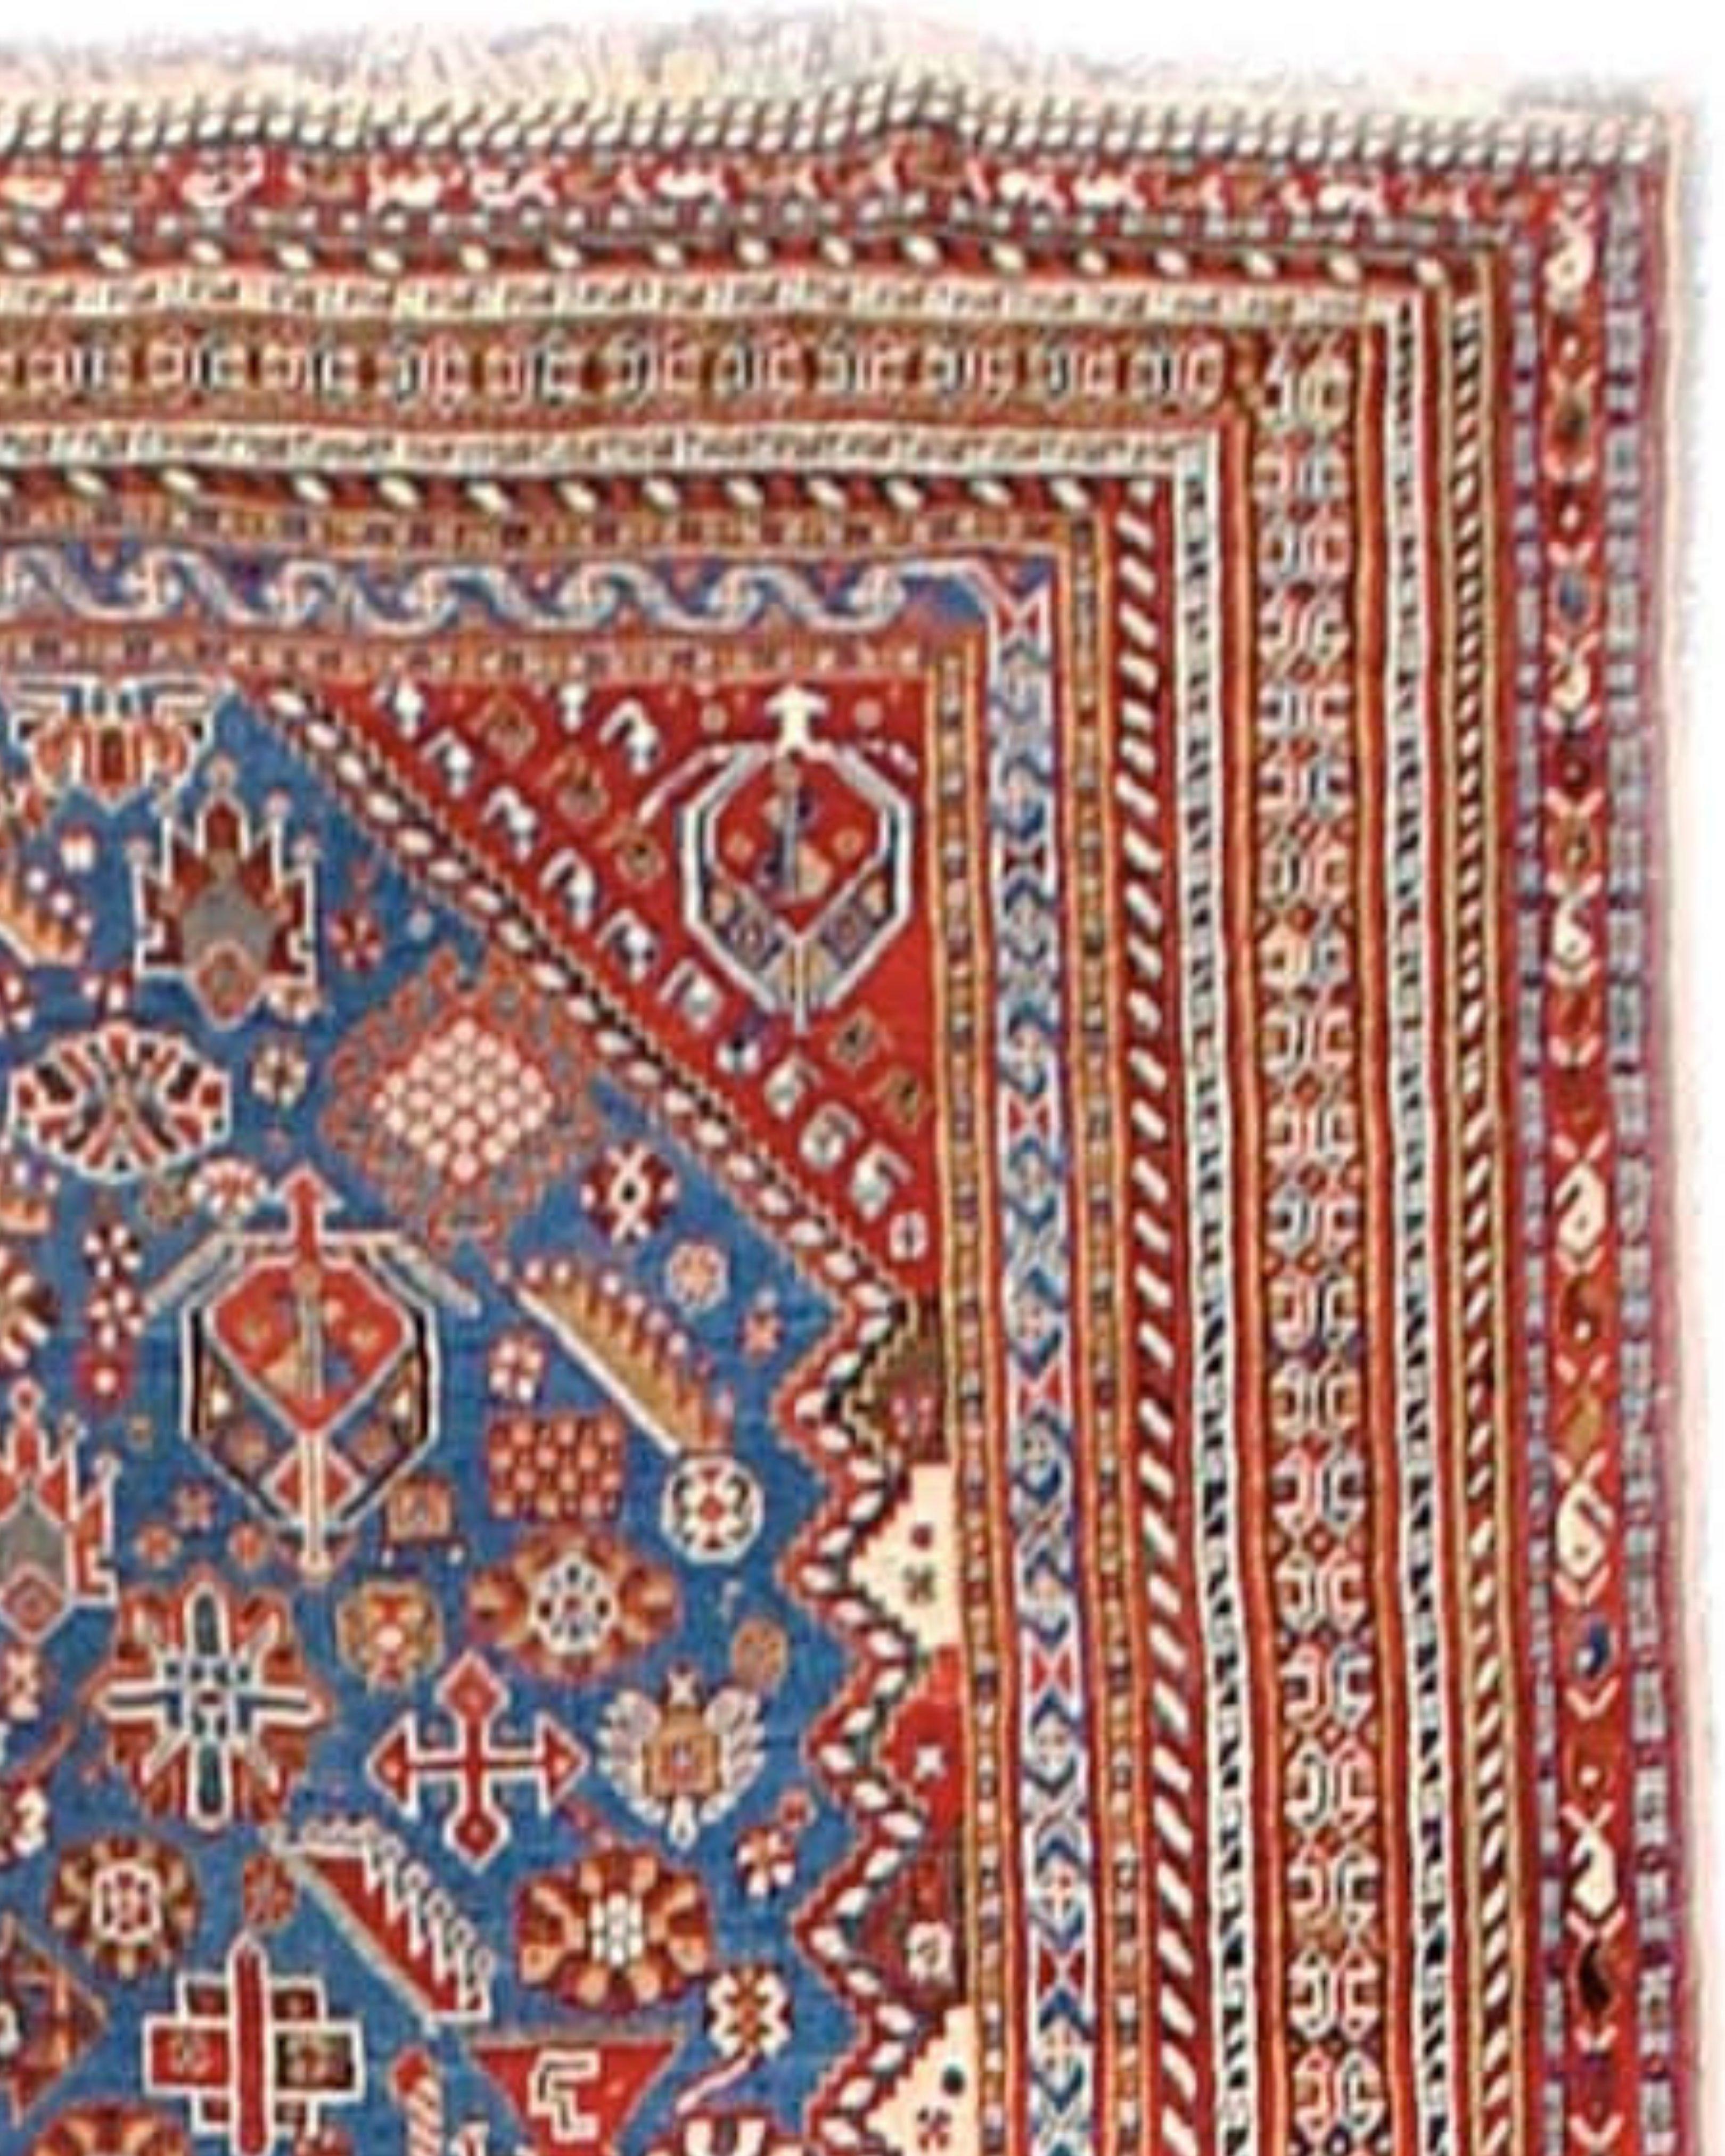 Antique Persian Qashqai Rug, 19th Century

During the 18thand early 19th century, the Qashqai tribal confederation controlled much of southwestern Persia around the vicinity of the city of Shiraz. THis tribal dominance rivaled the authority of the